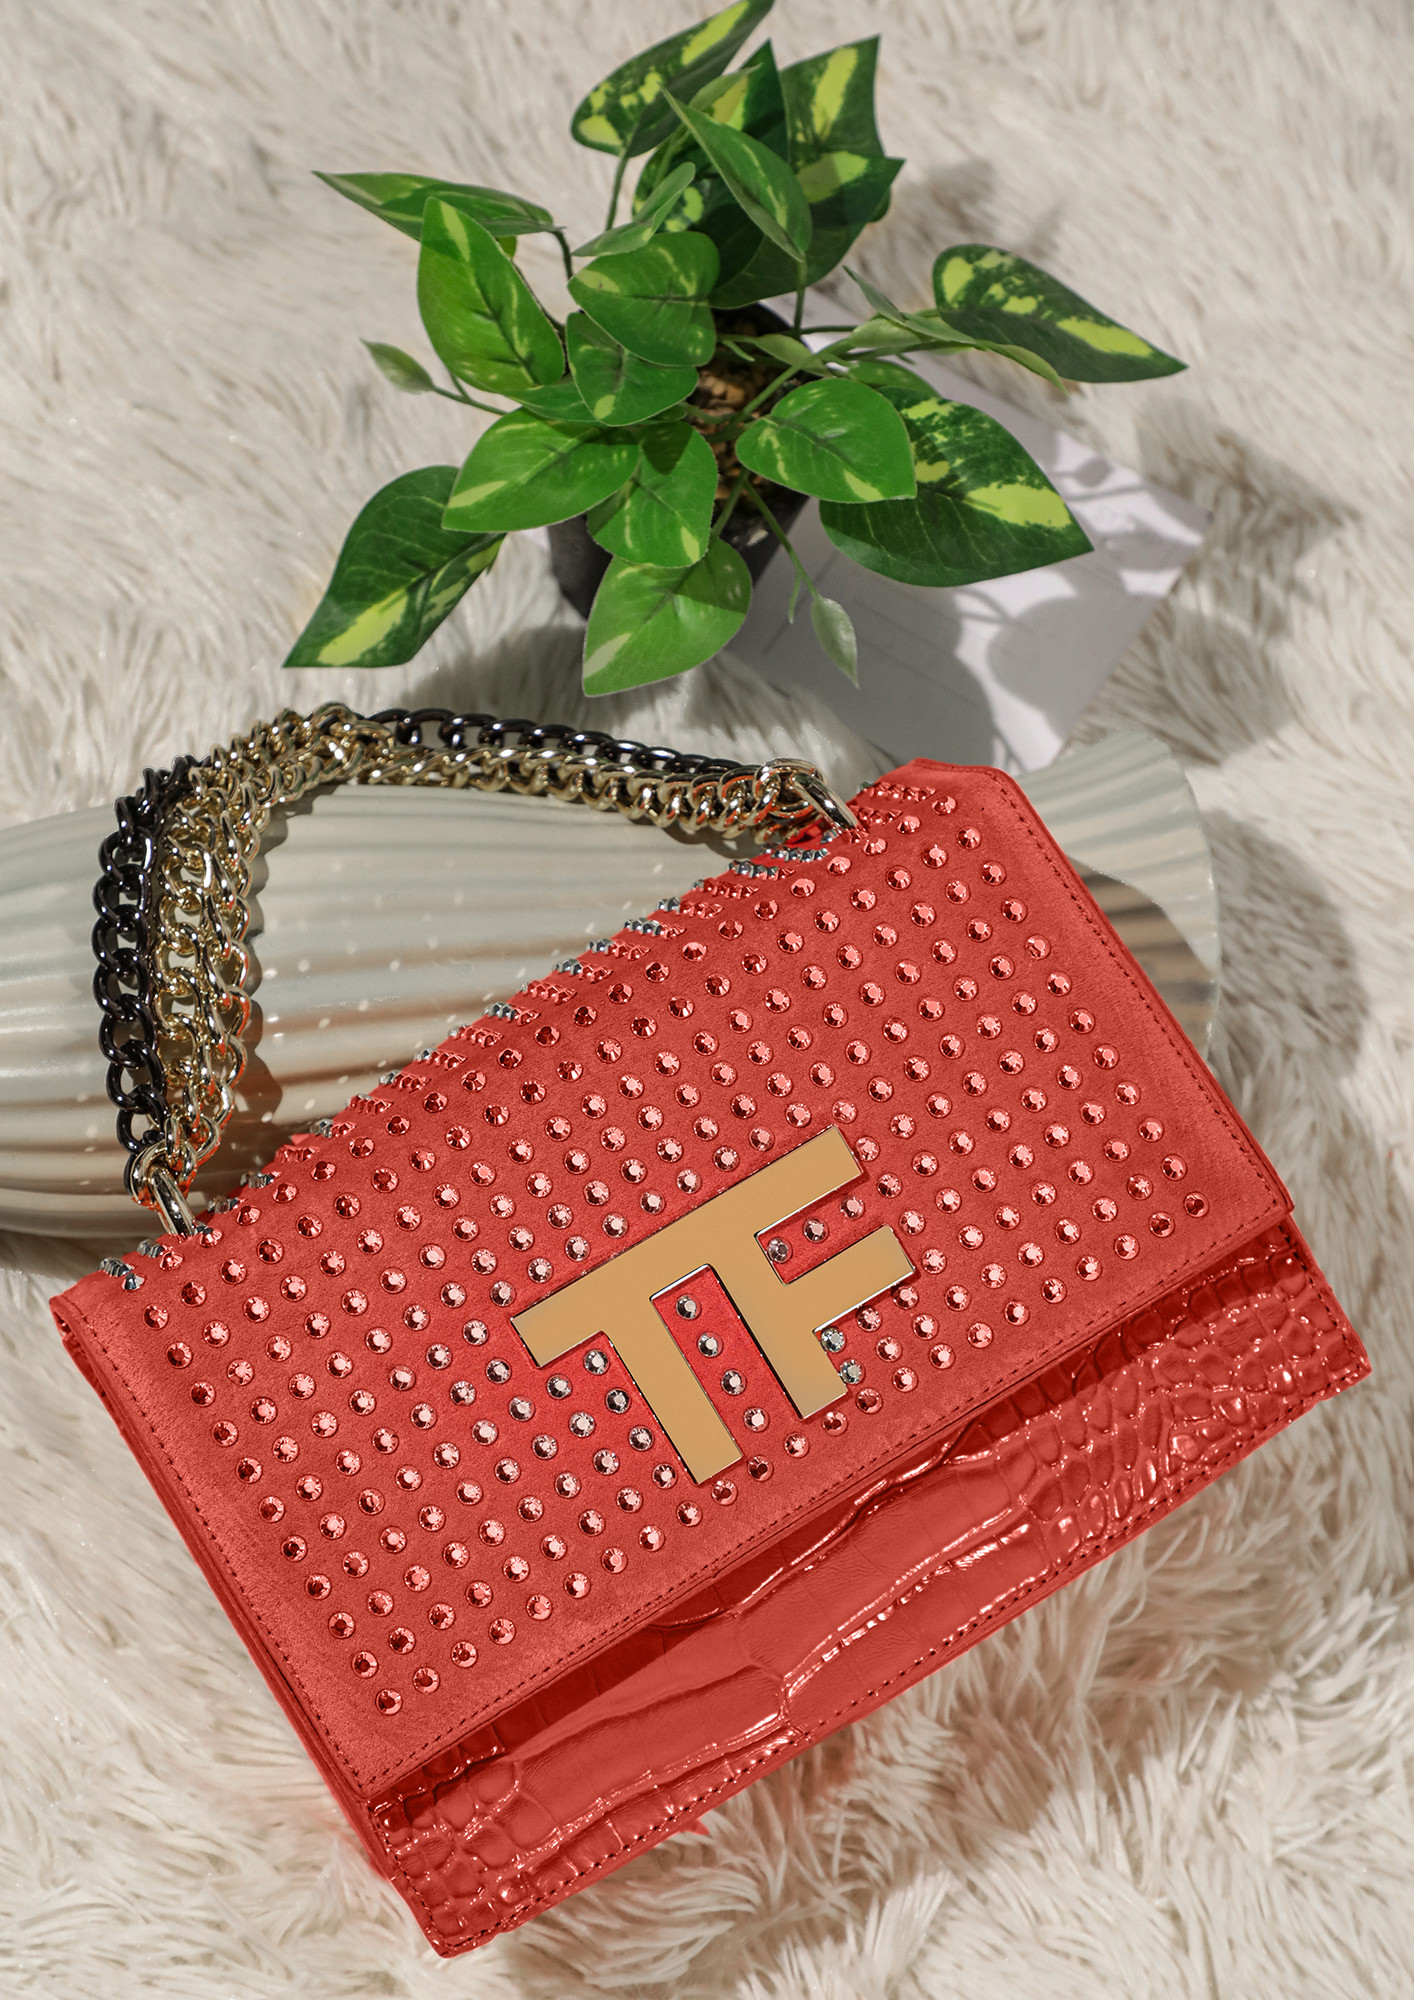 Tom Ford's Spring 2019 Runway was Packed With Brand New Bag Designs in  Soft, Gorgeous Leather - PurseBlog